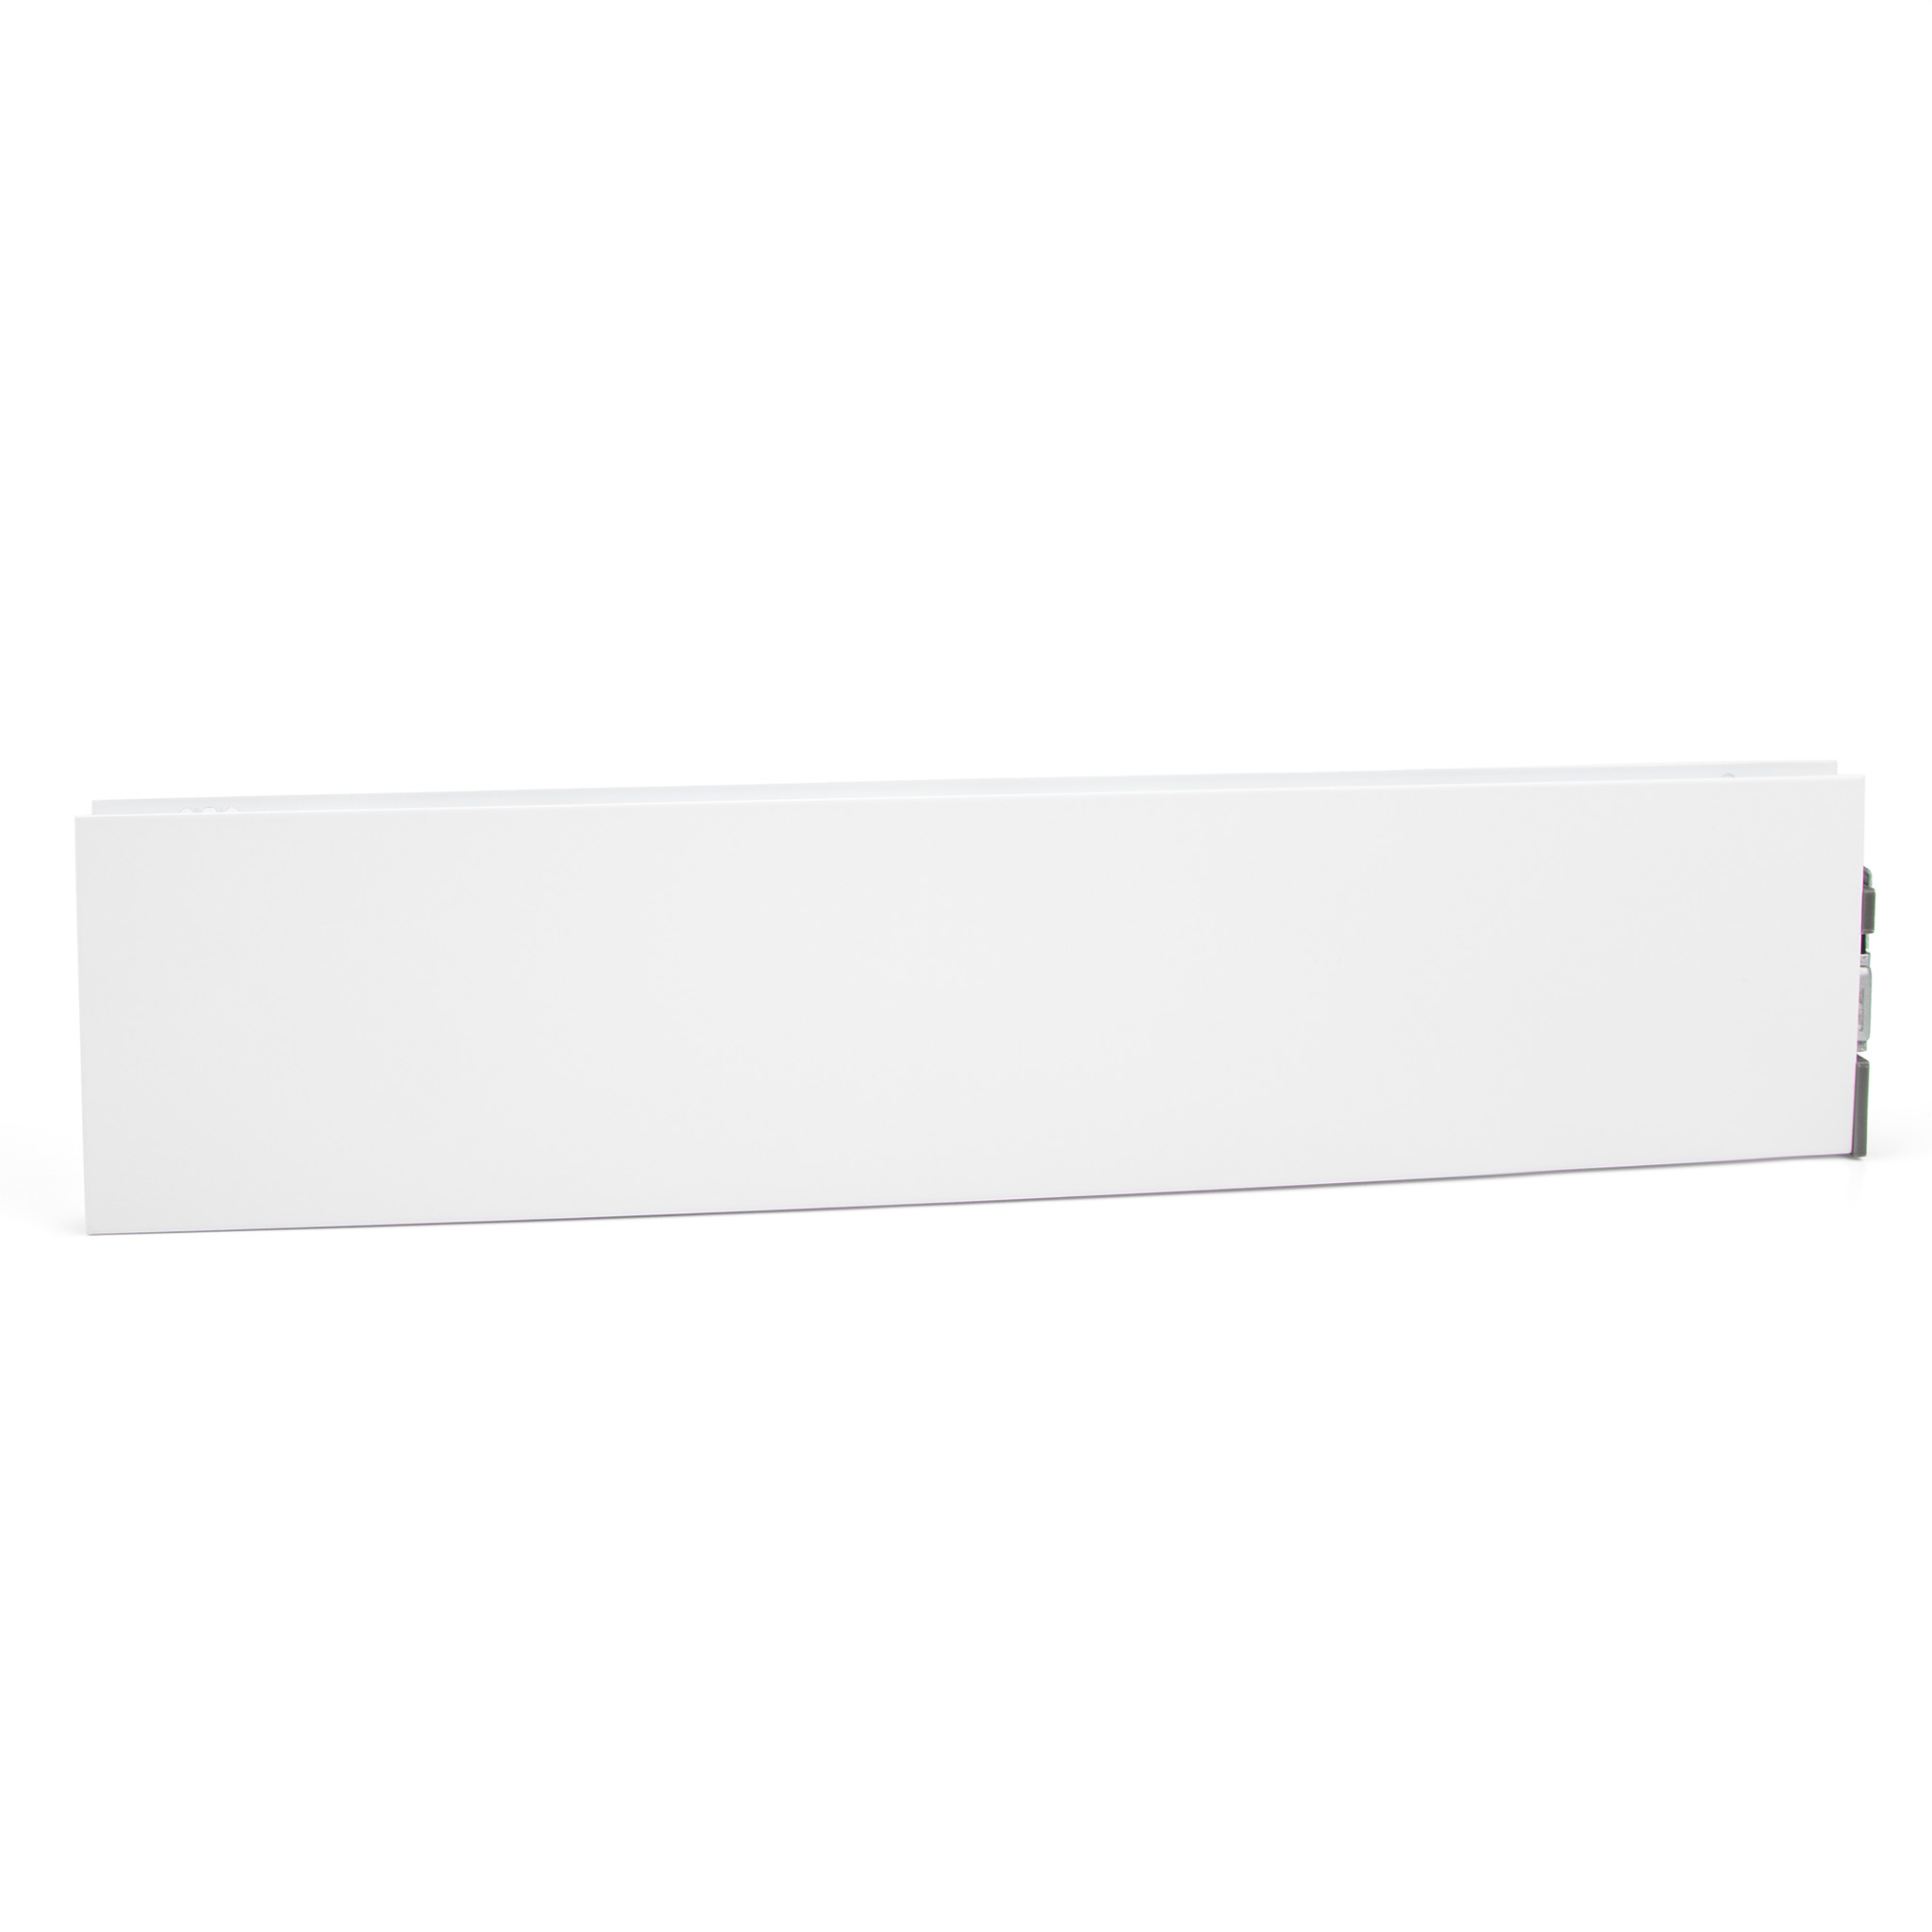 M-Series Fusion Side Wall, 350mm Length, 88mm Height, Lunar White